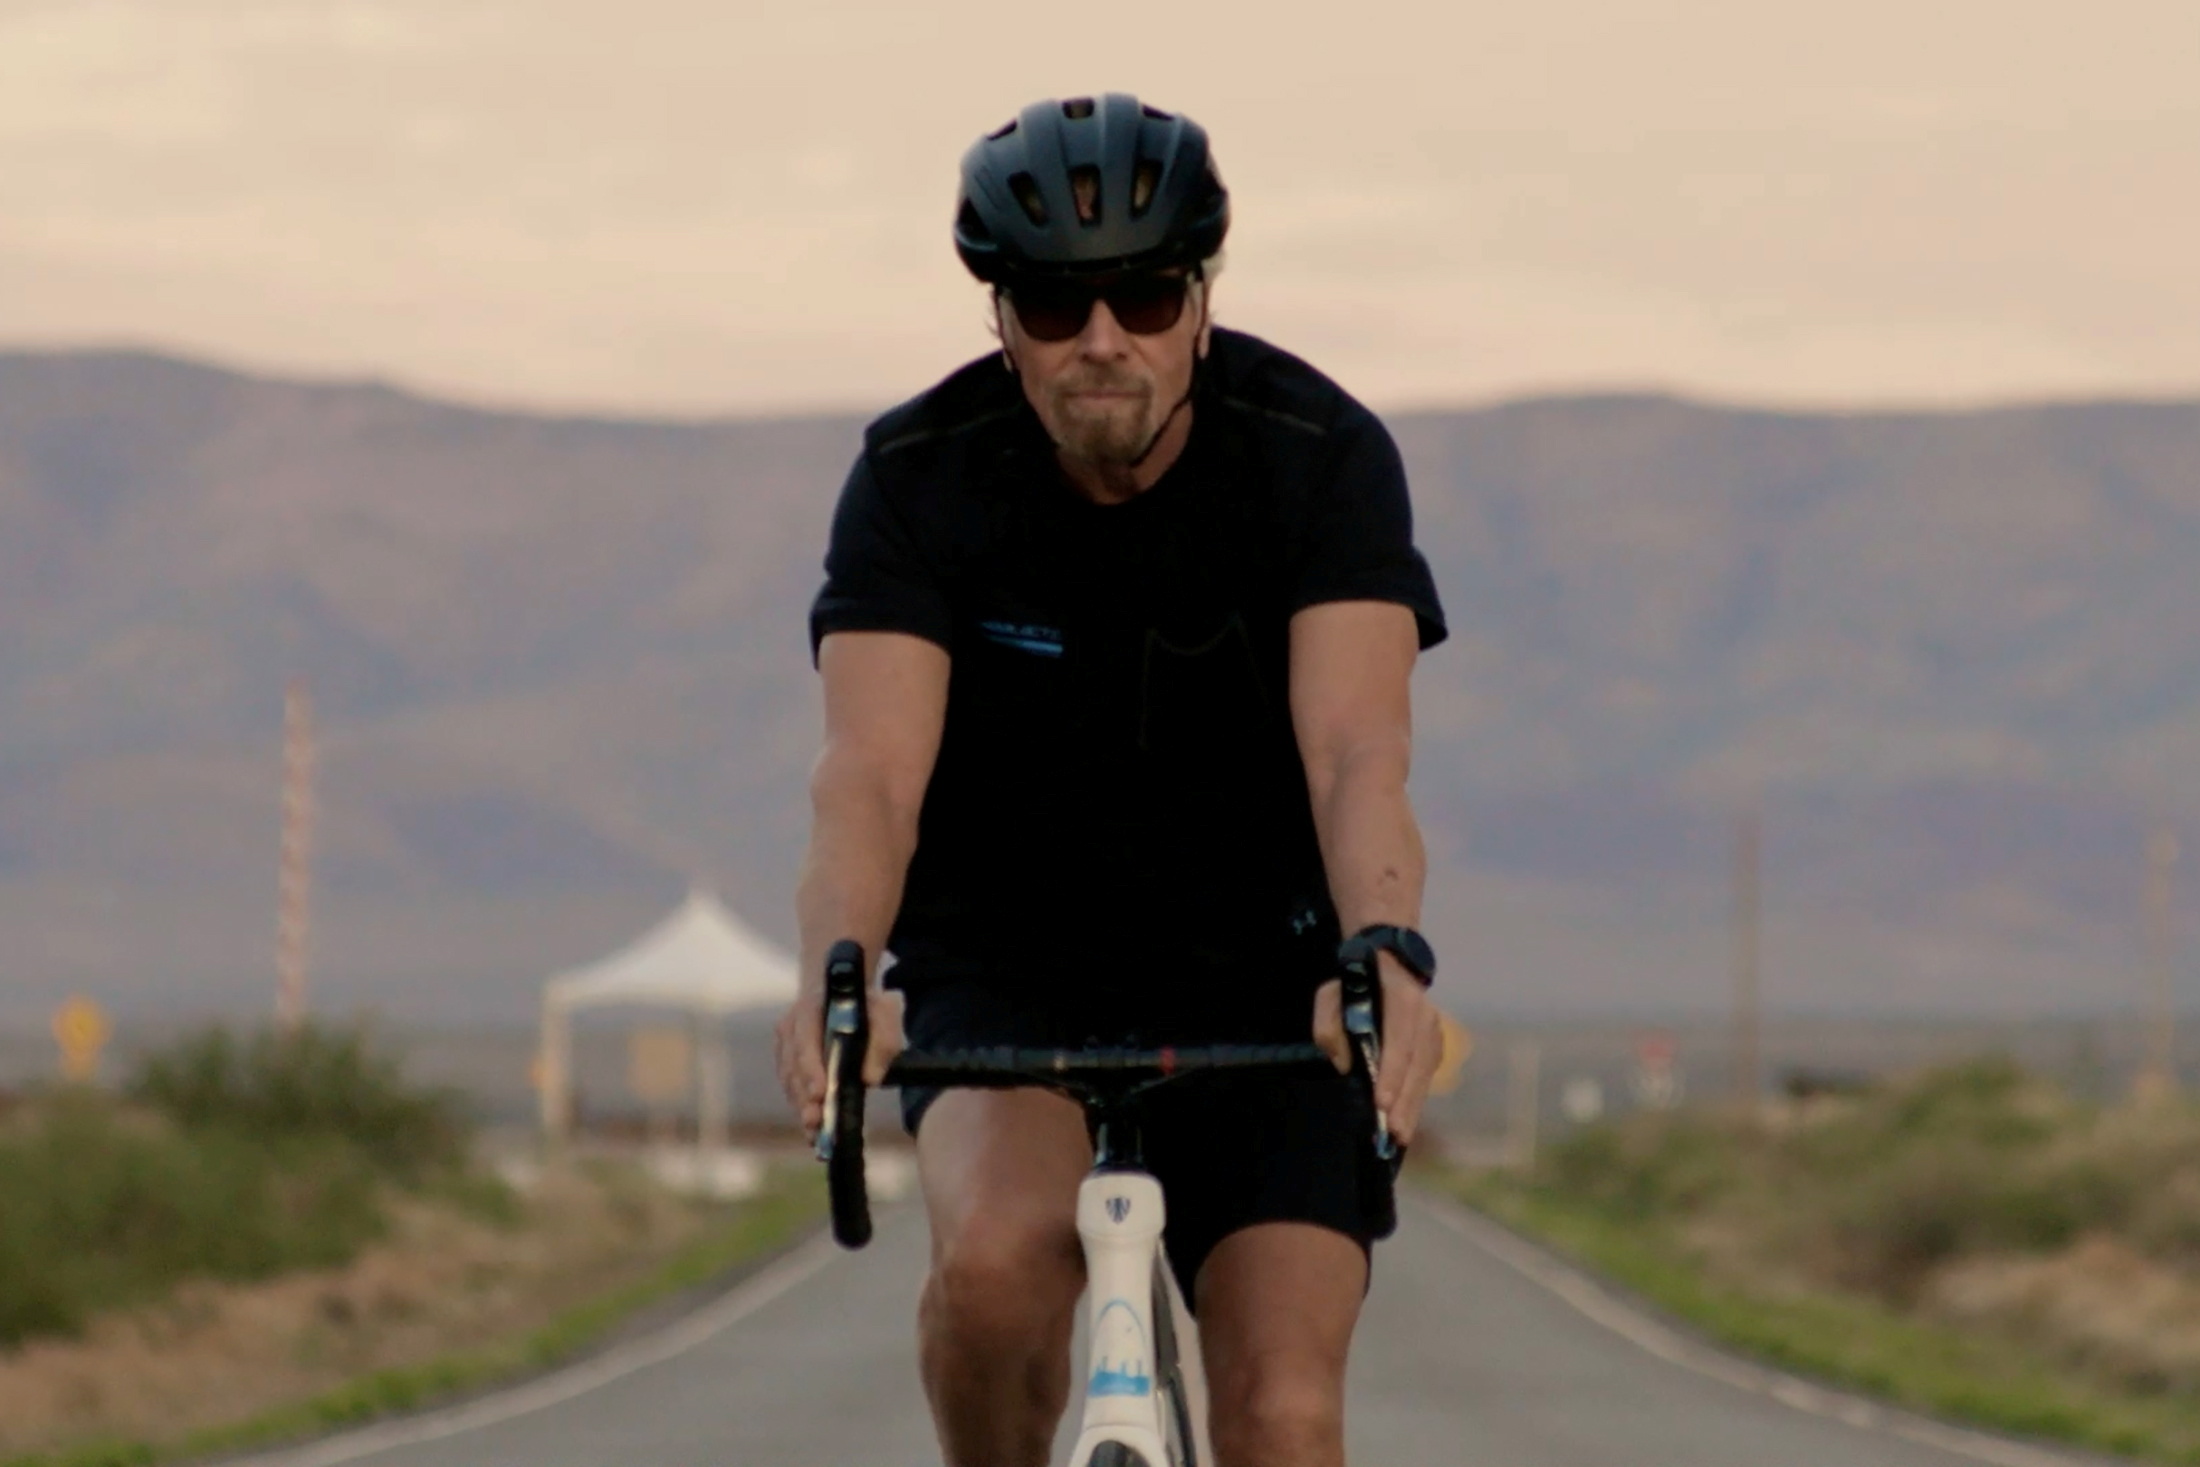 Richard Branson arrives by bicycle to Spaceport America